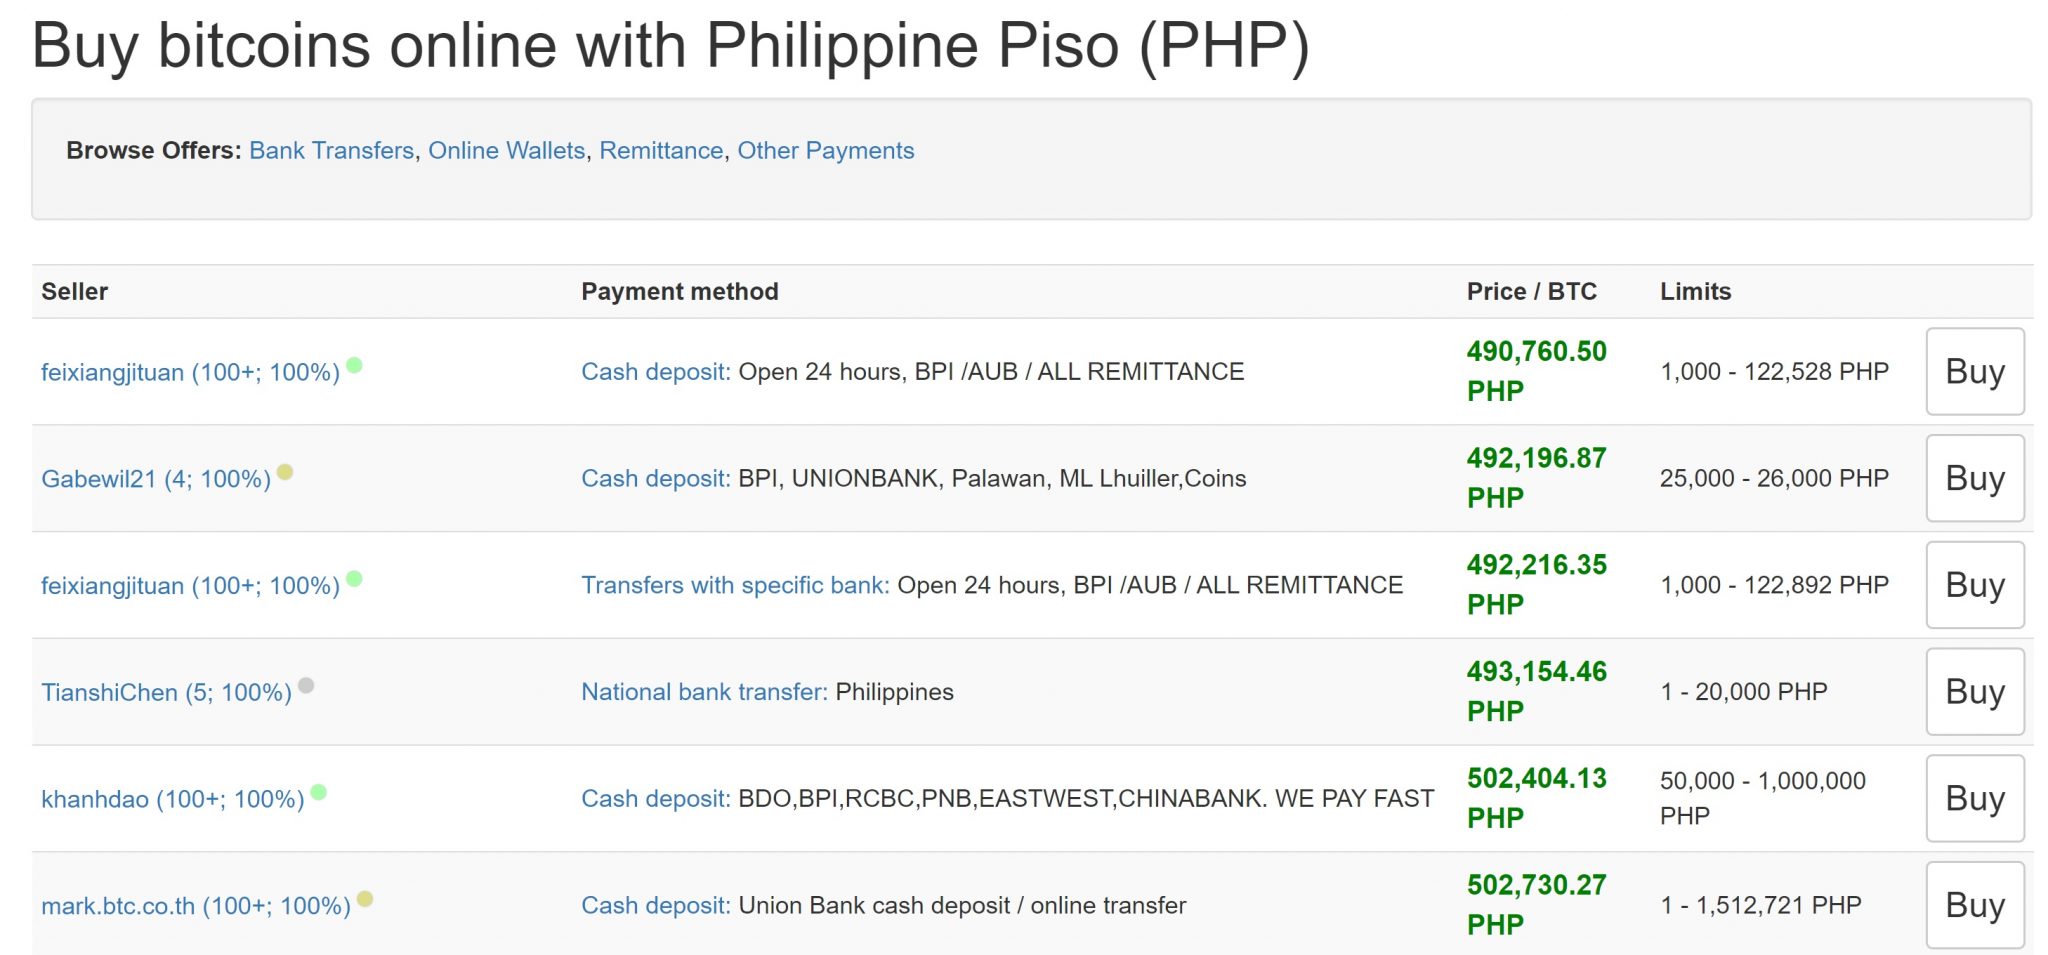 How to Buy Bitcoin in the Philippines | Featured Bitcoin News